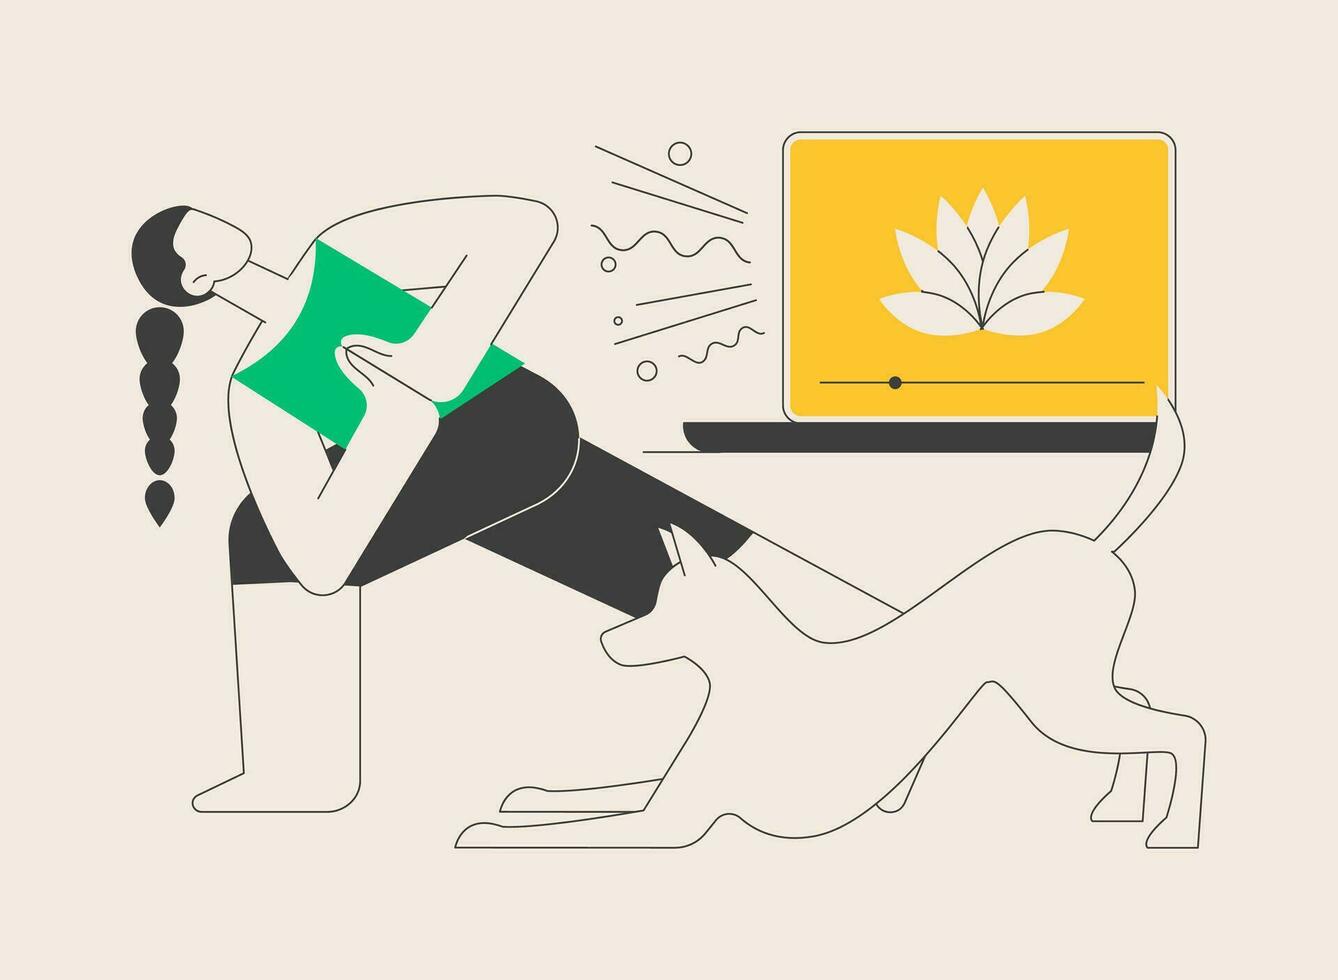 Home yoga abstract concept vector illustration.